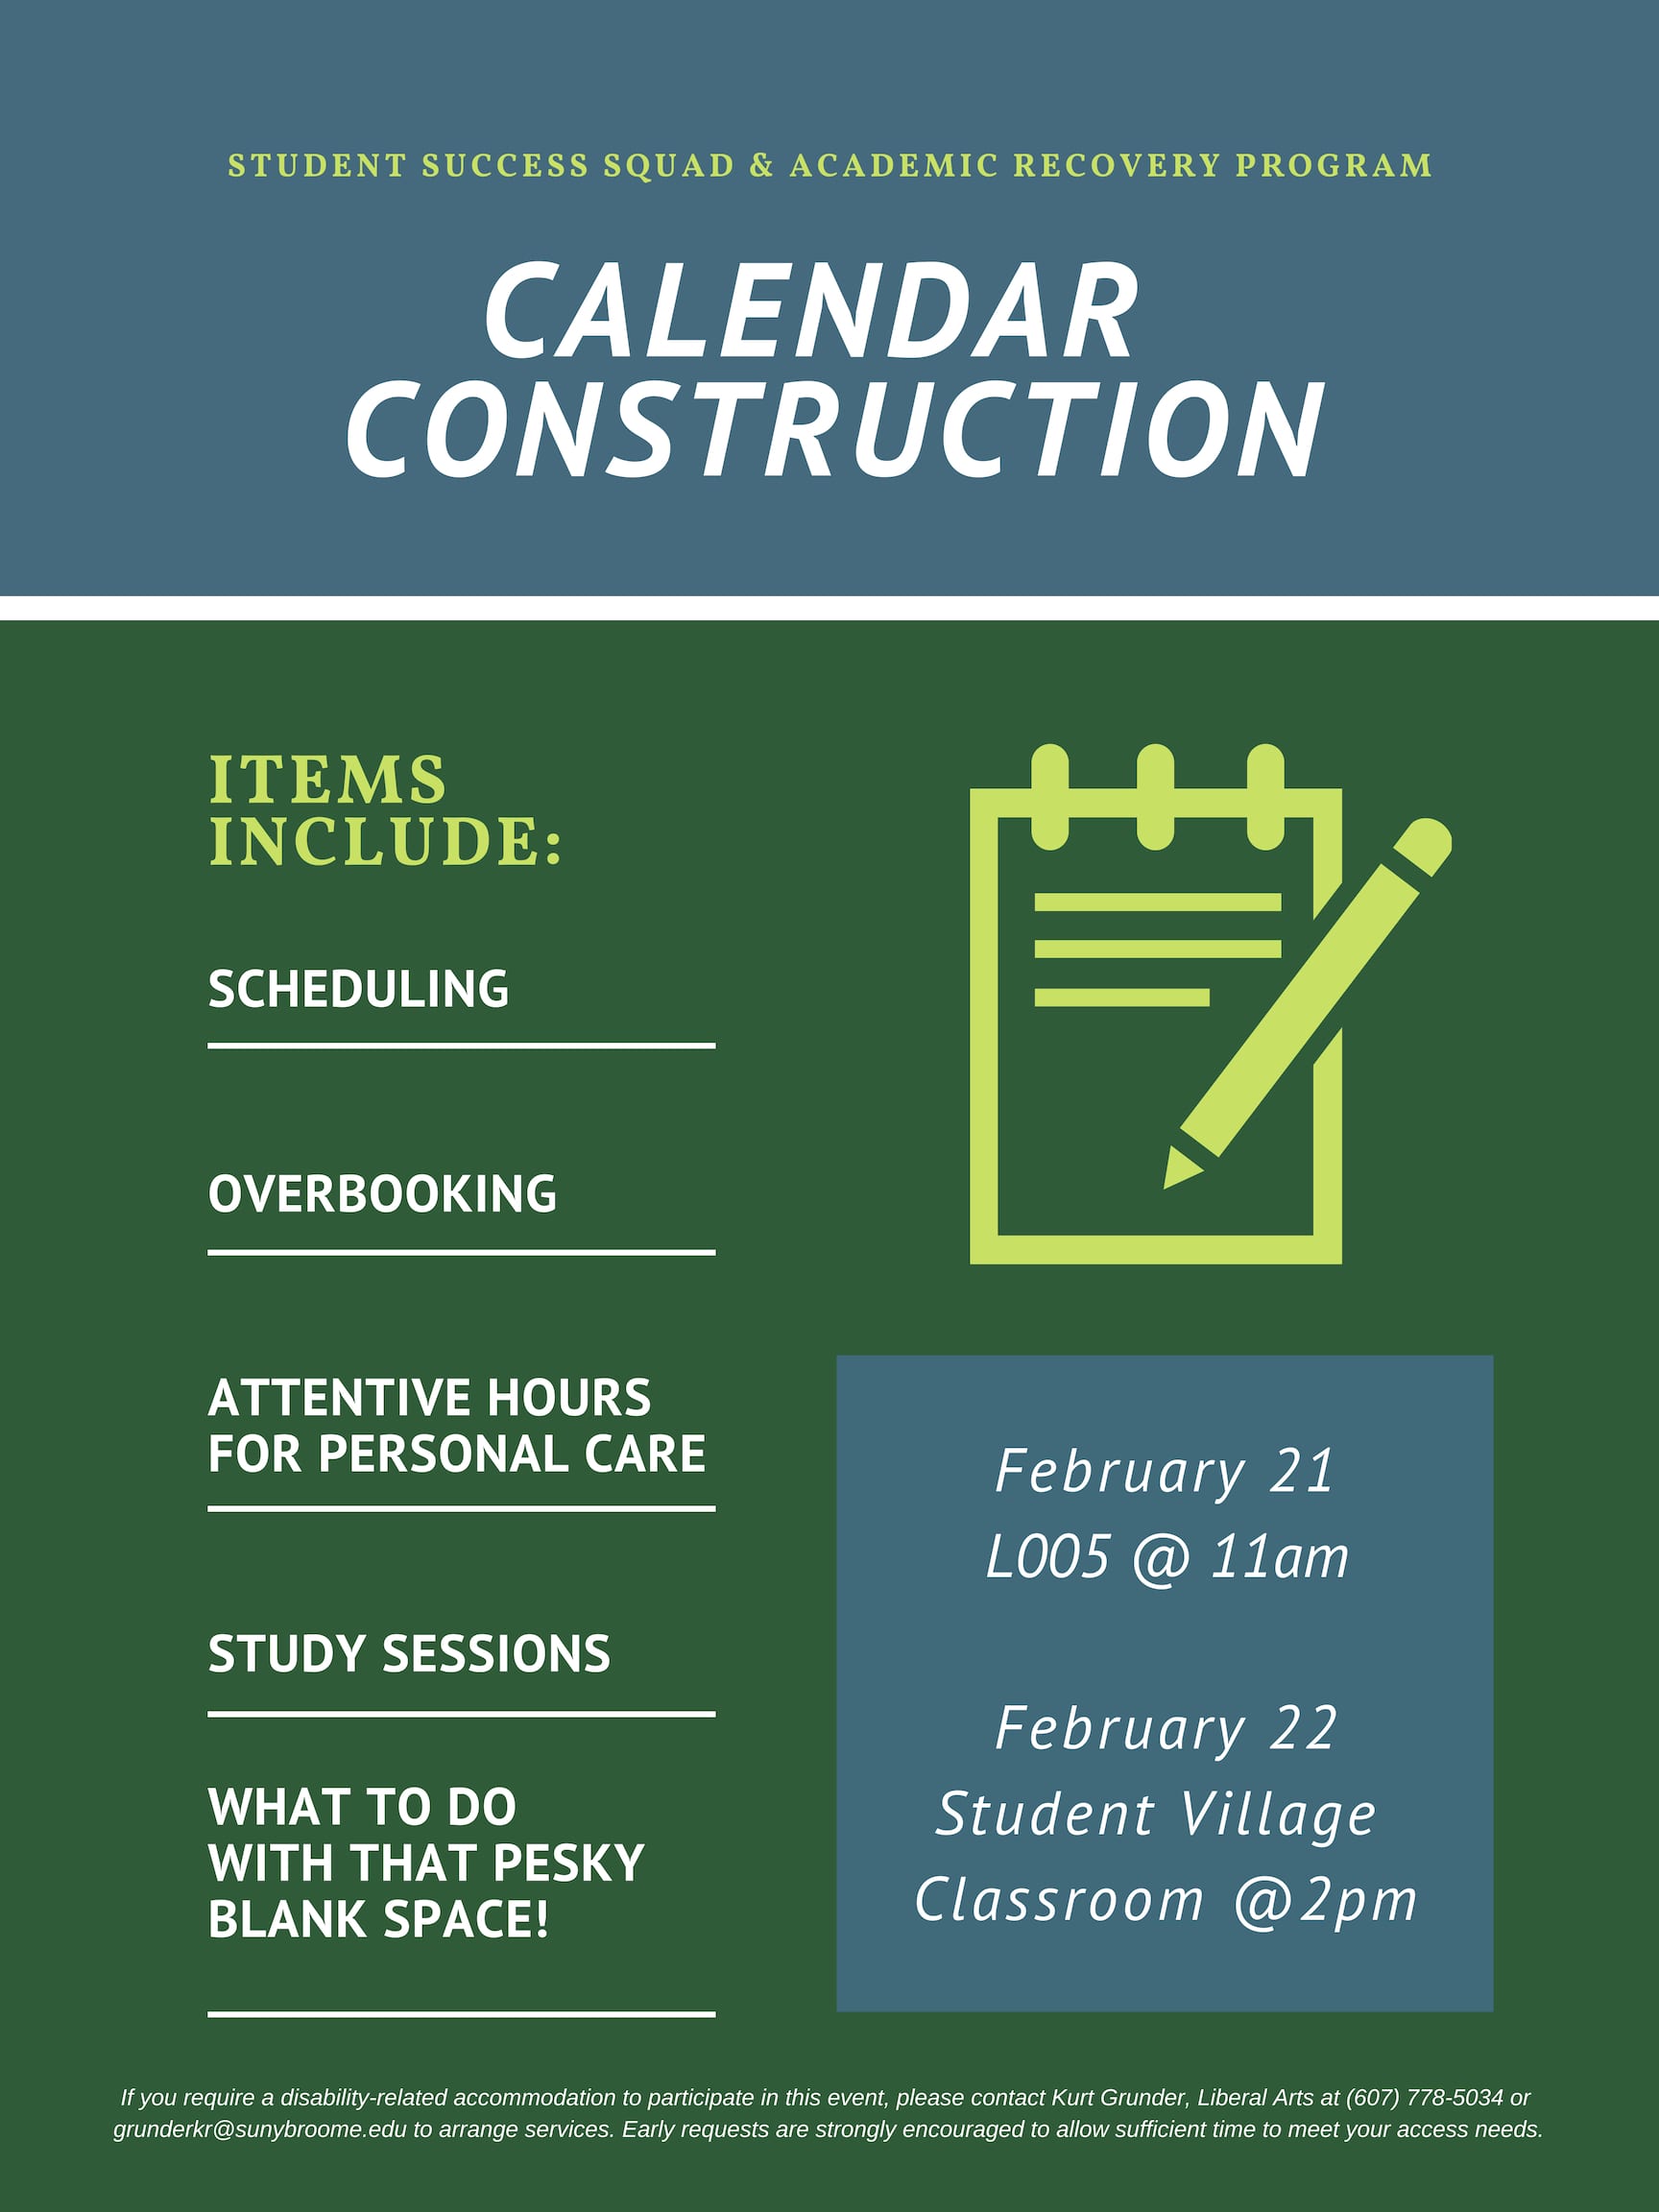 Get organized: Calendar Construction workshops on Feb 21 and March 1